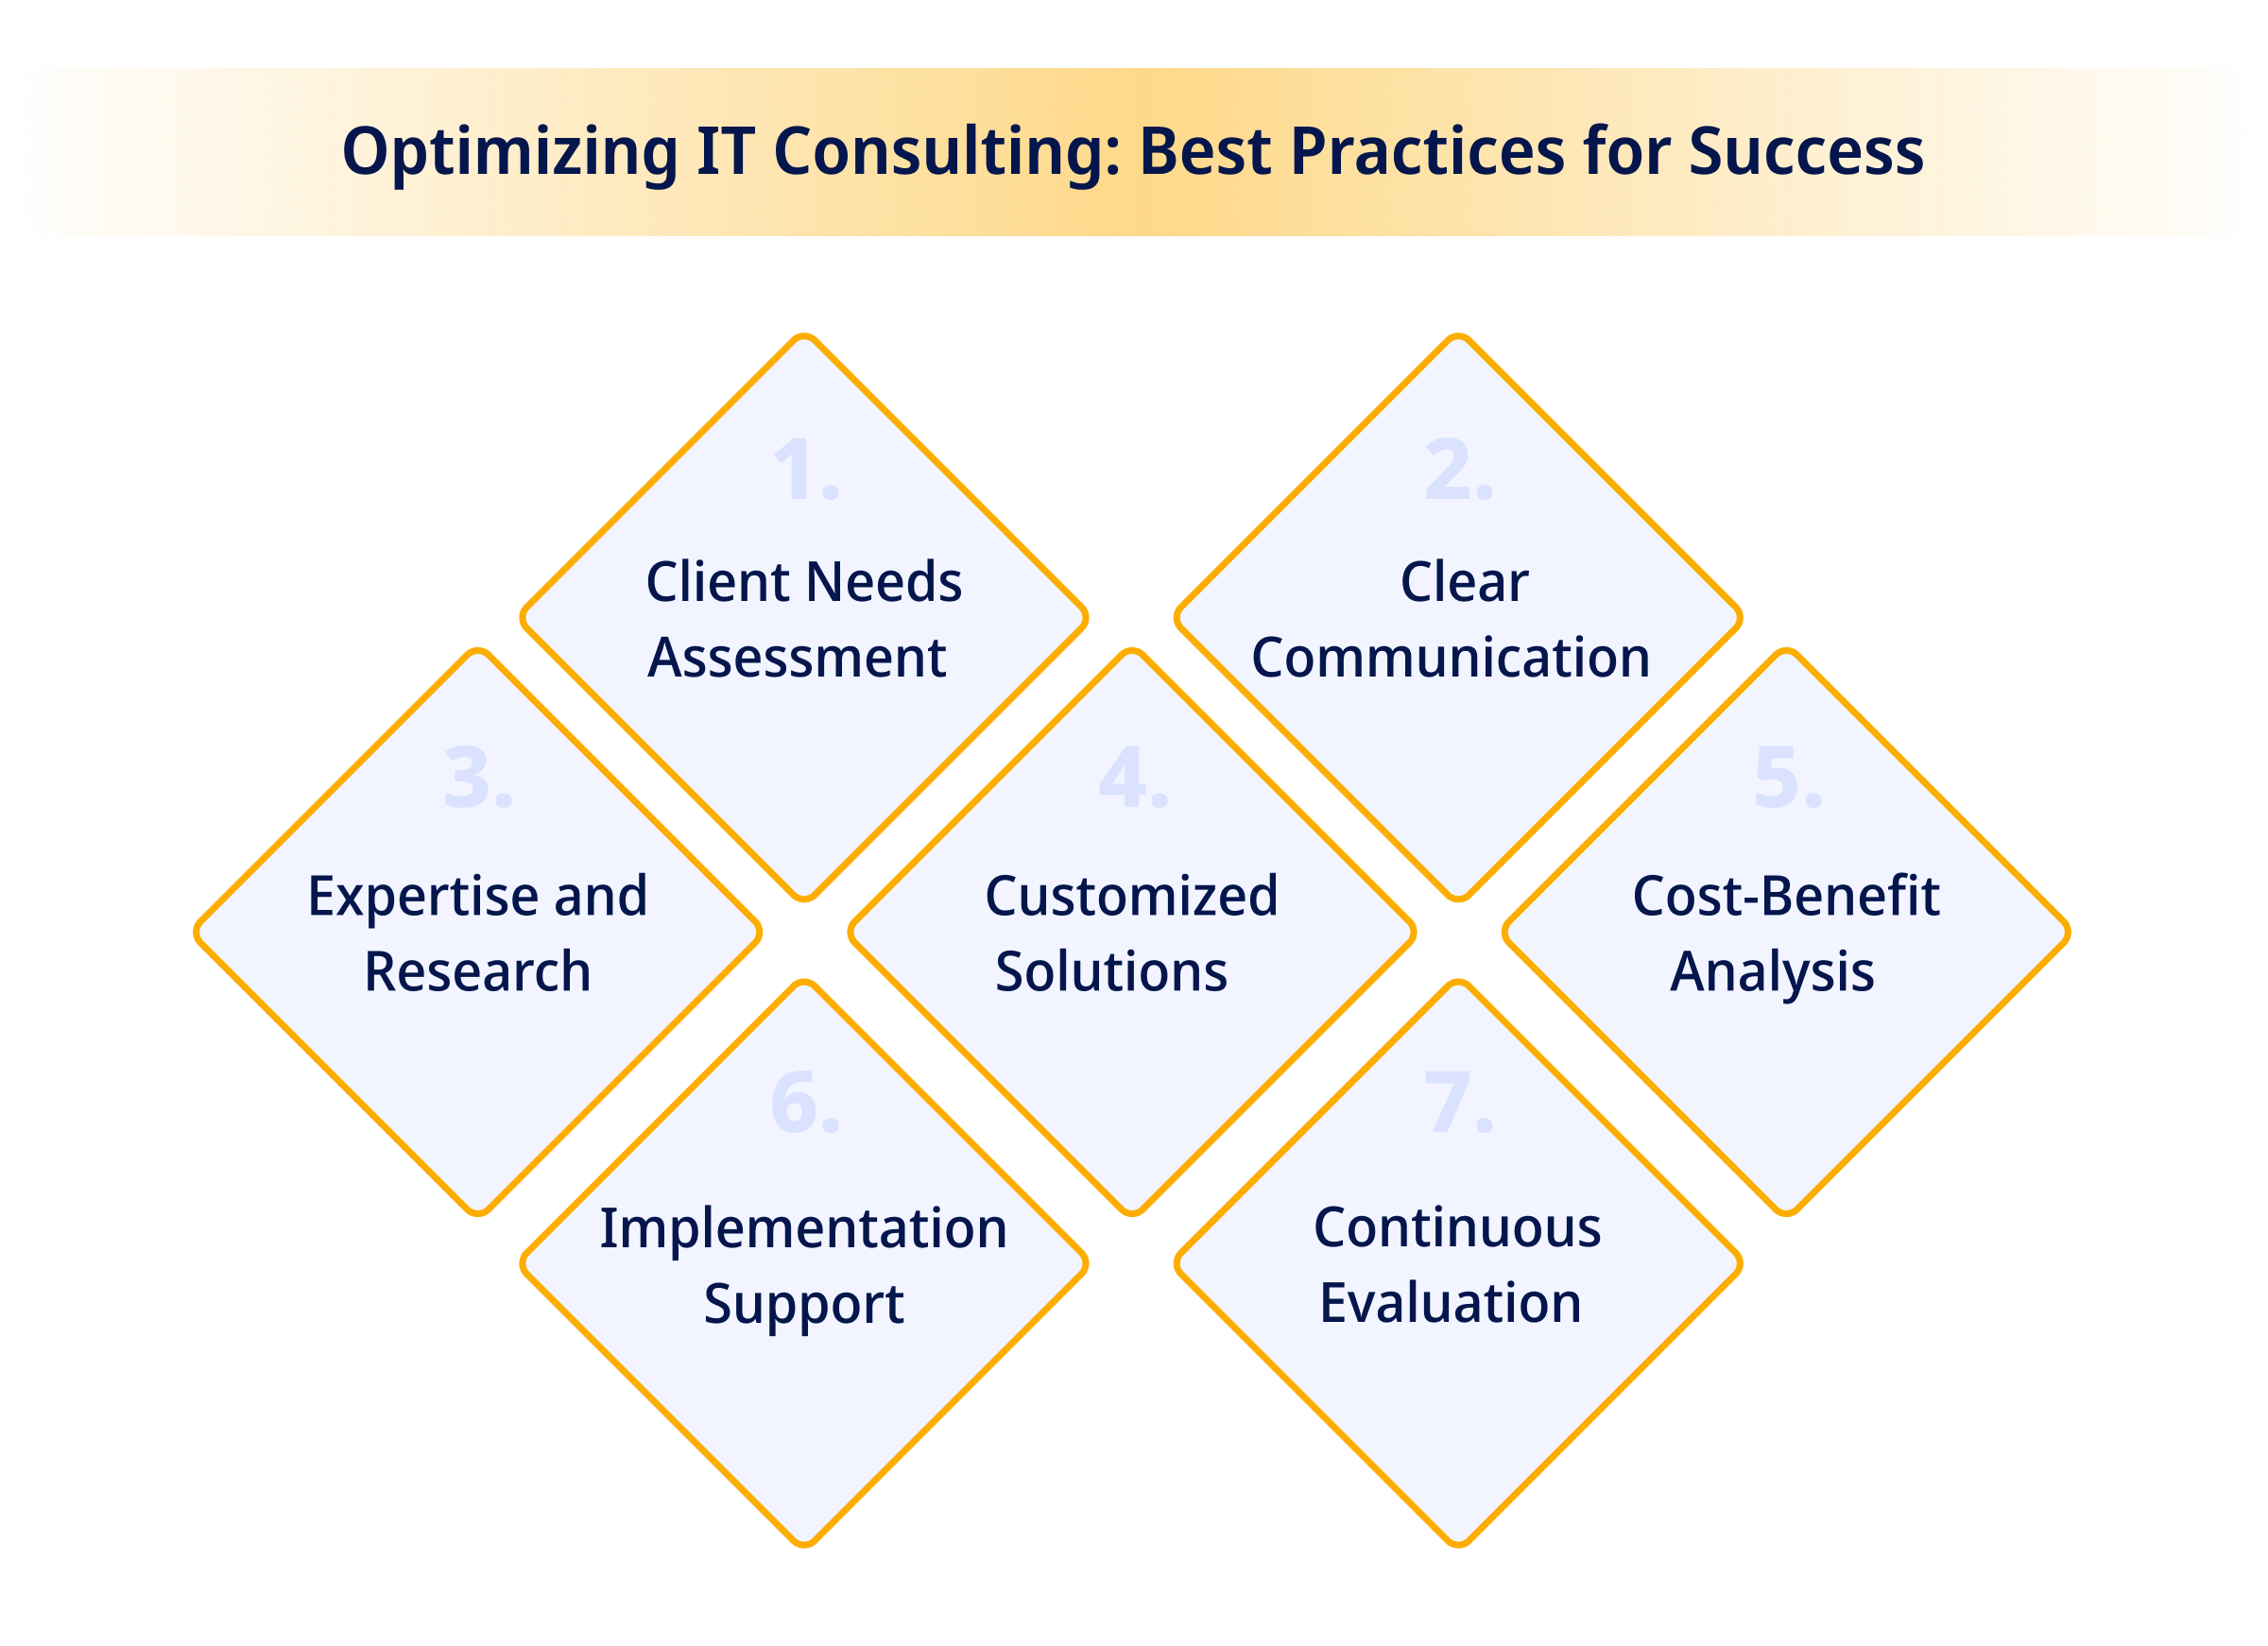 Optimizing IT Consulting Best Practices for Success